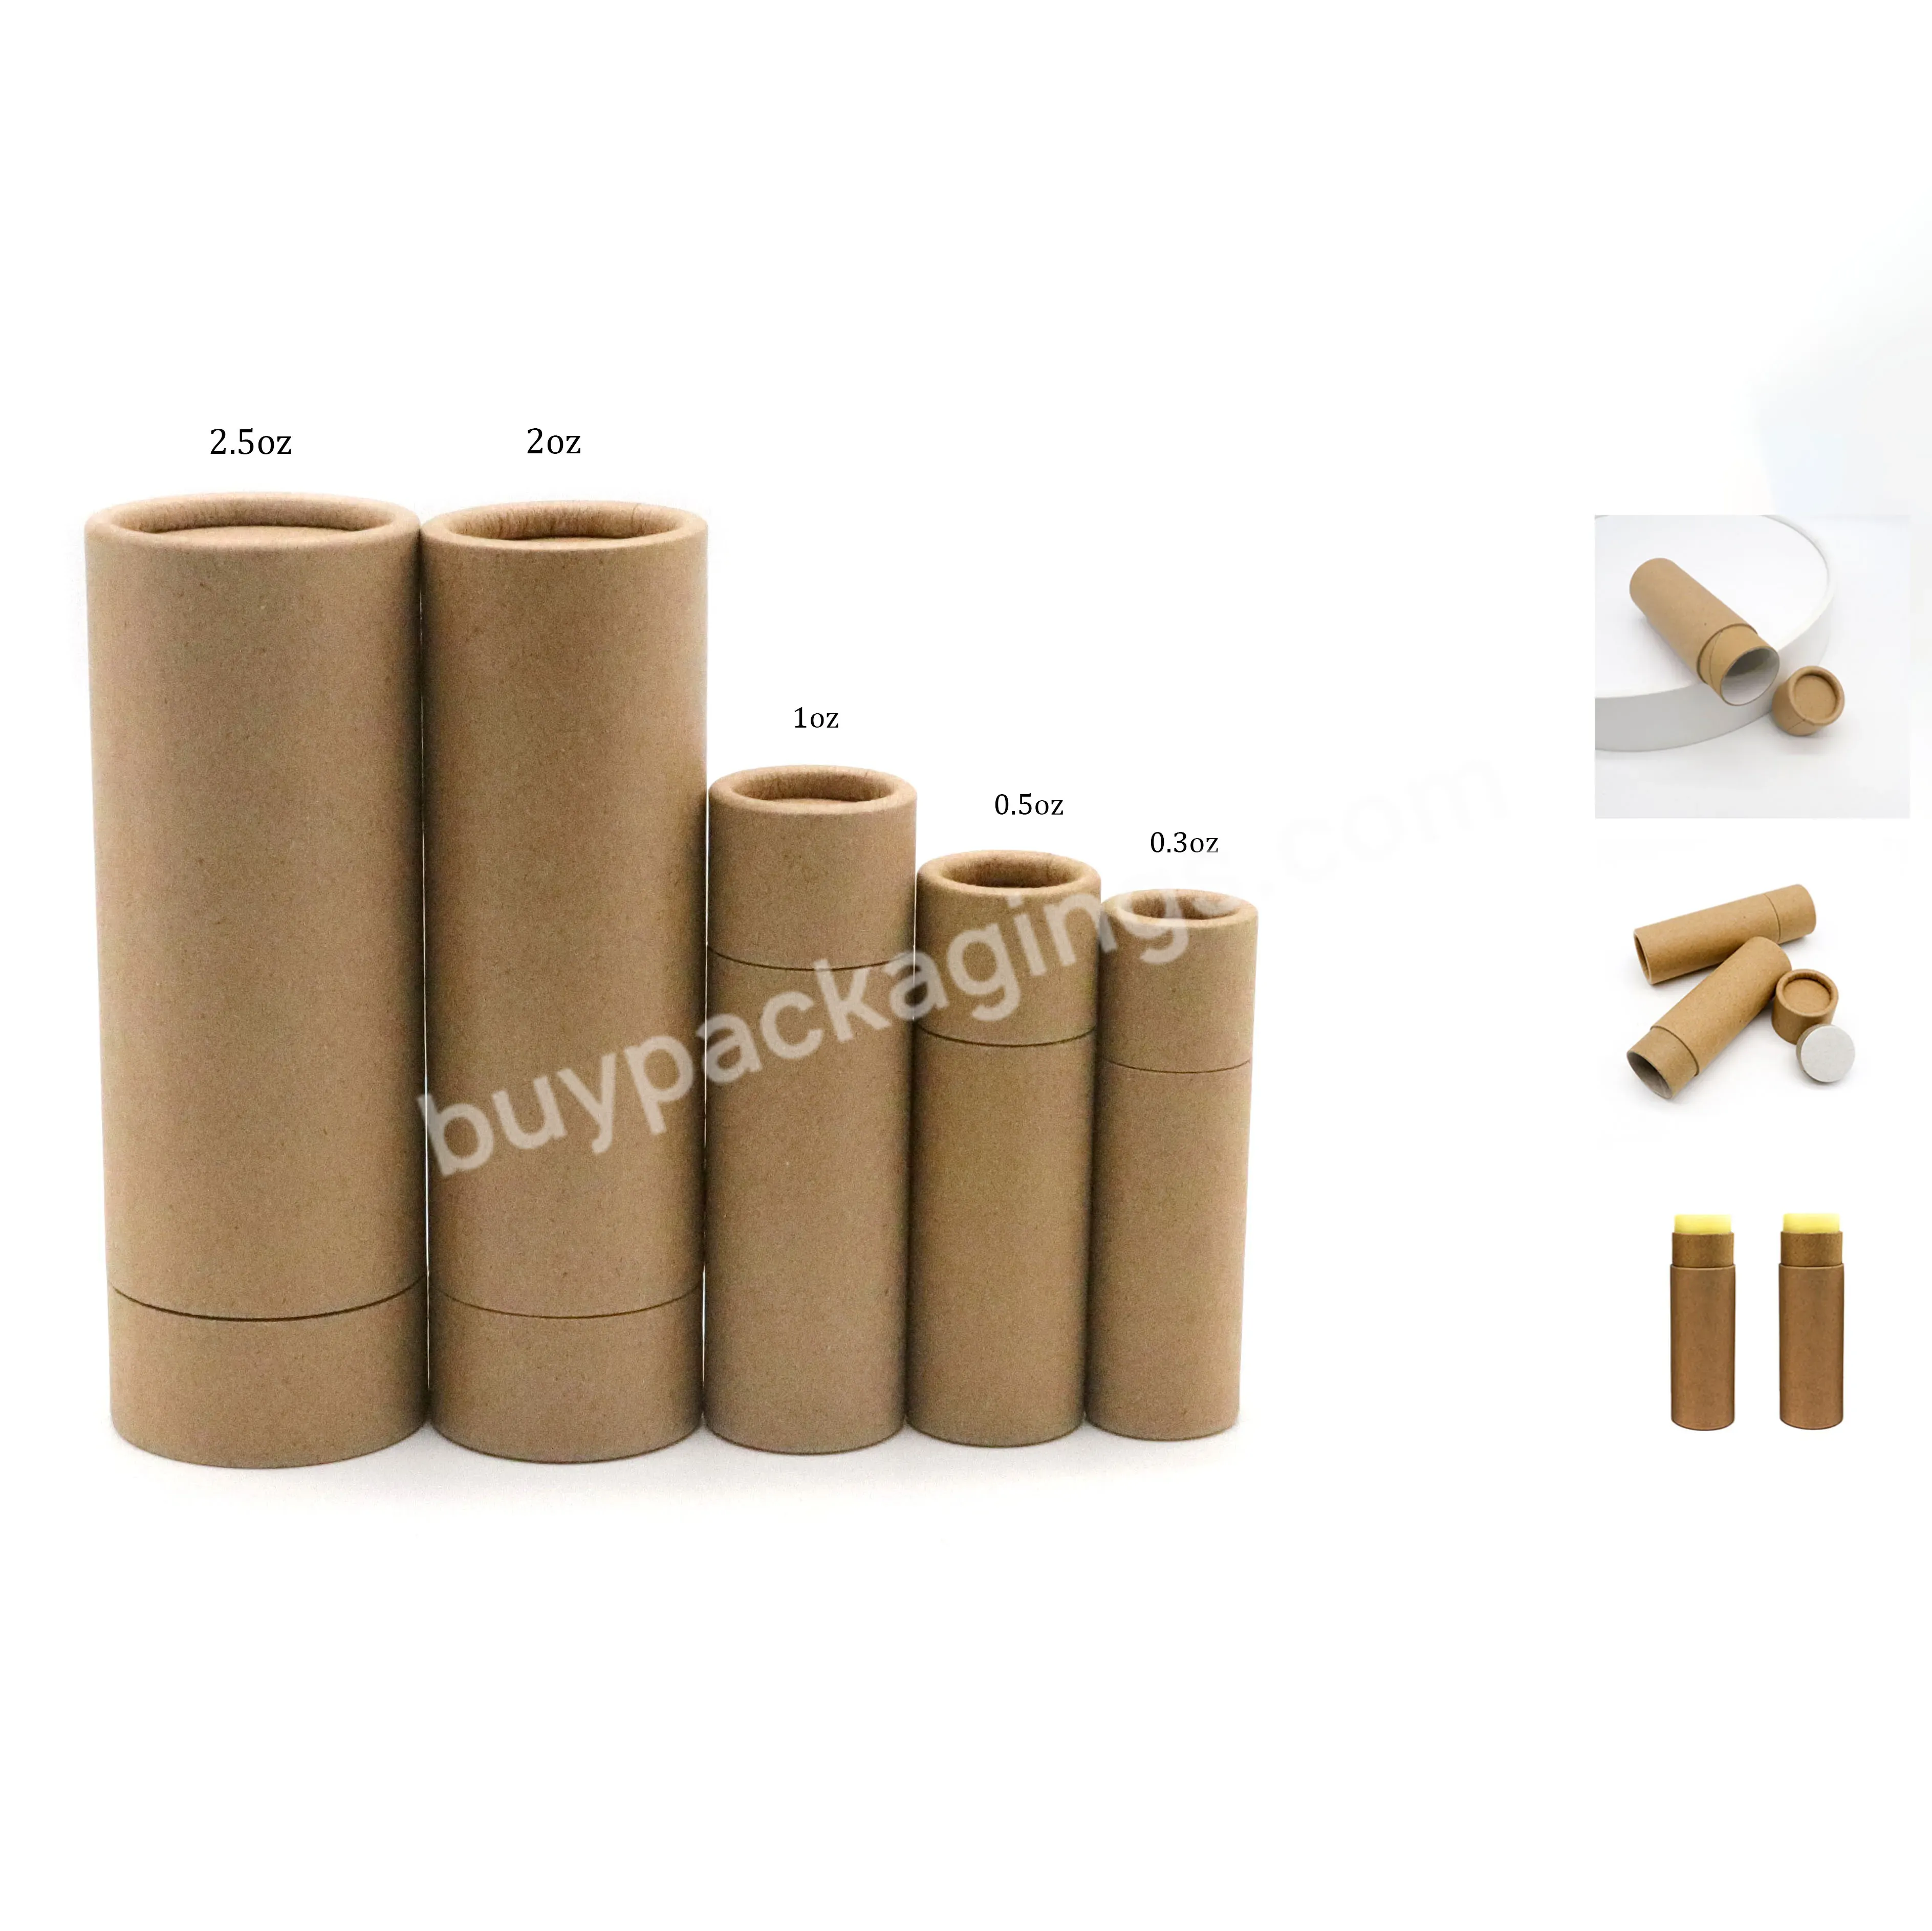 Eco Empty Cardboard Container Biodegradable Push Up Paper Tubes For Deodorant Stick Packaging - Buy Deodorant Stick Packaging,Cardboard Tube Packaging,Paper Tube.